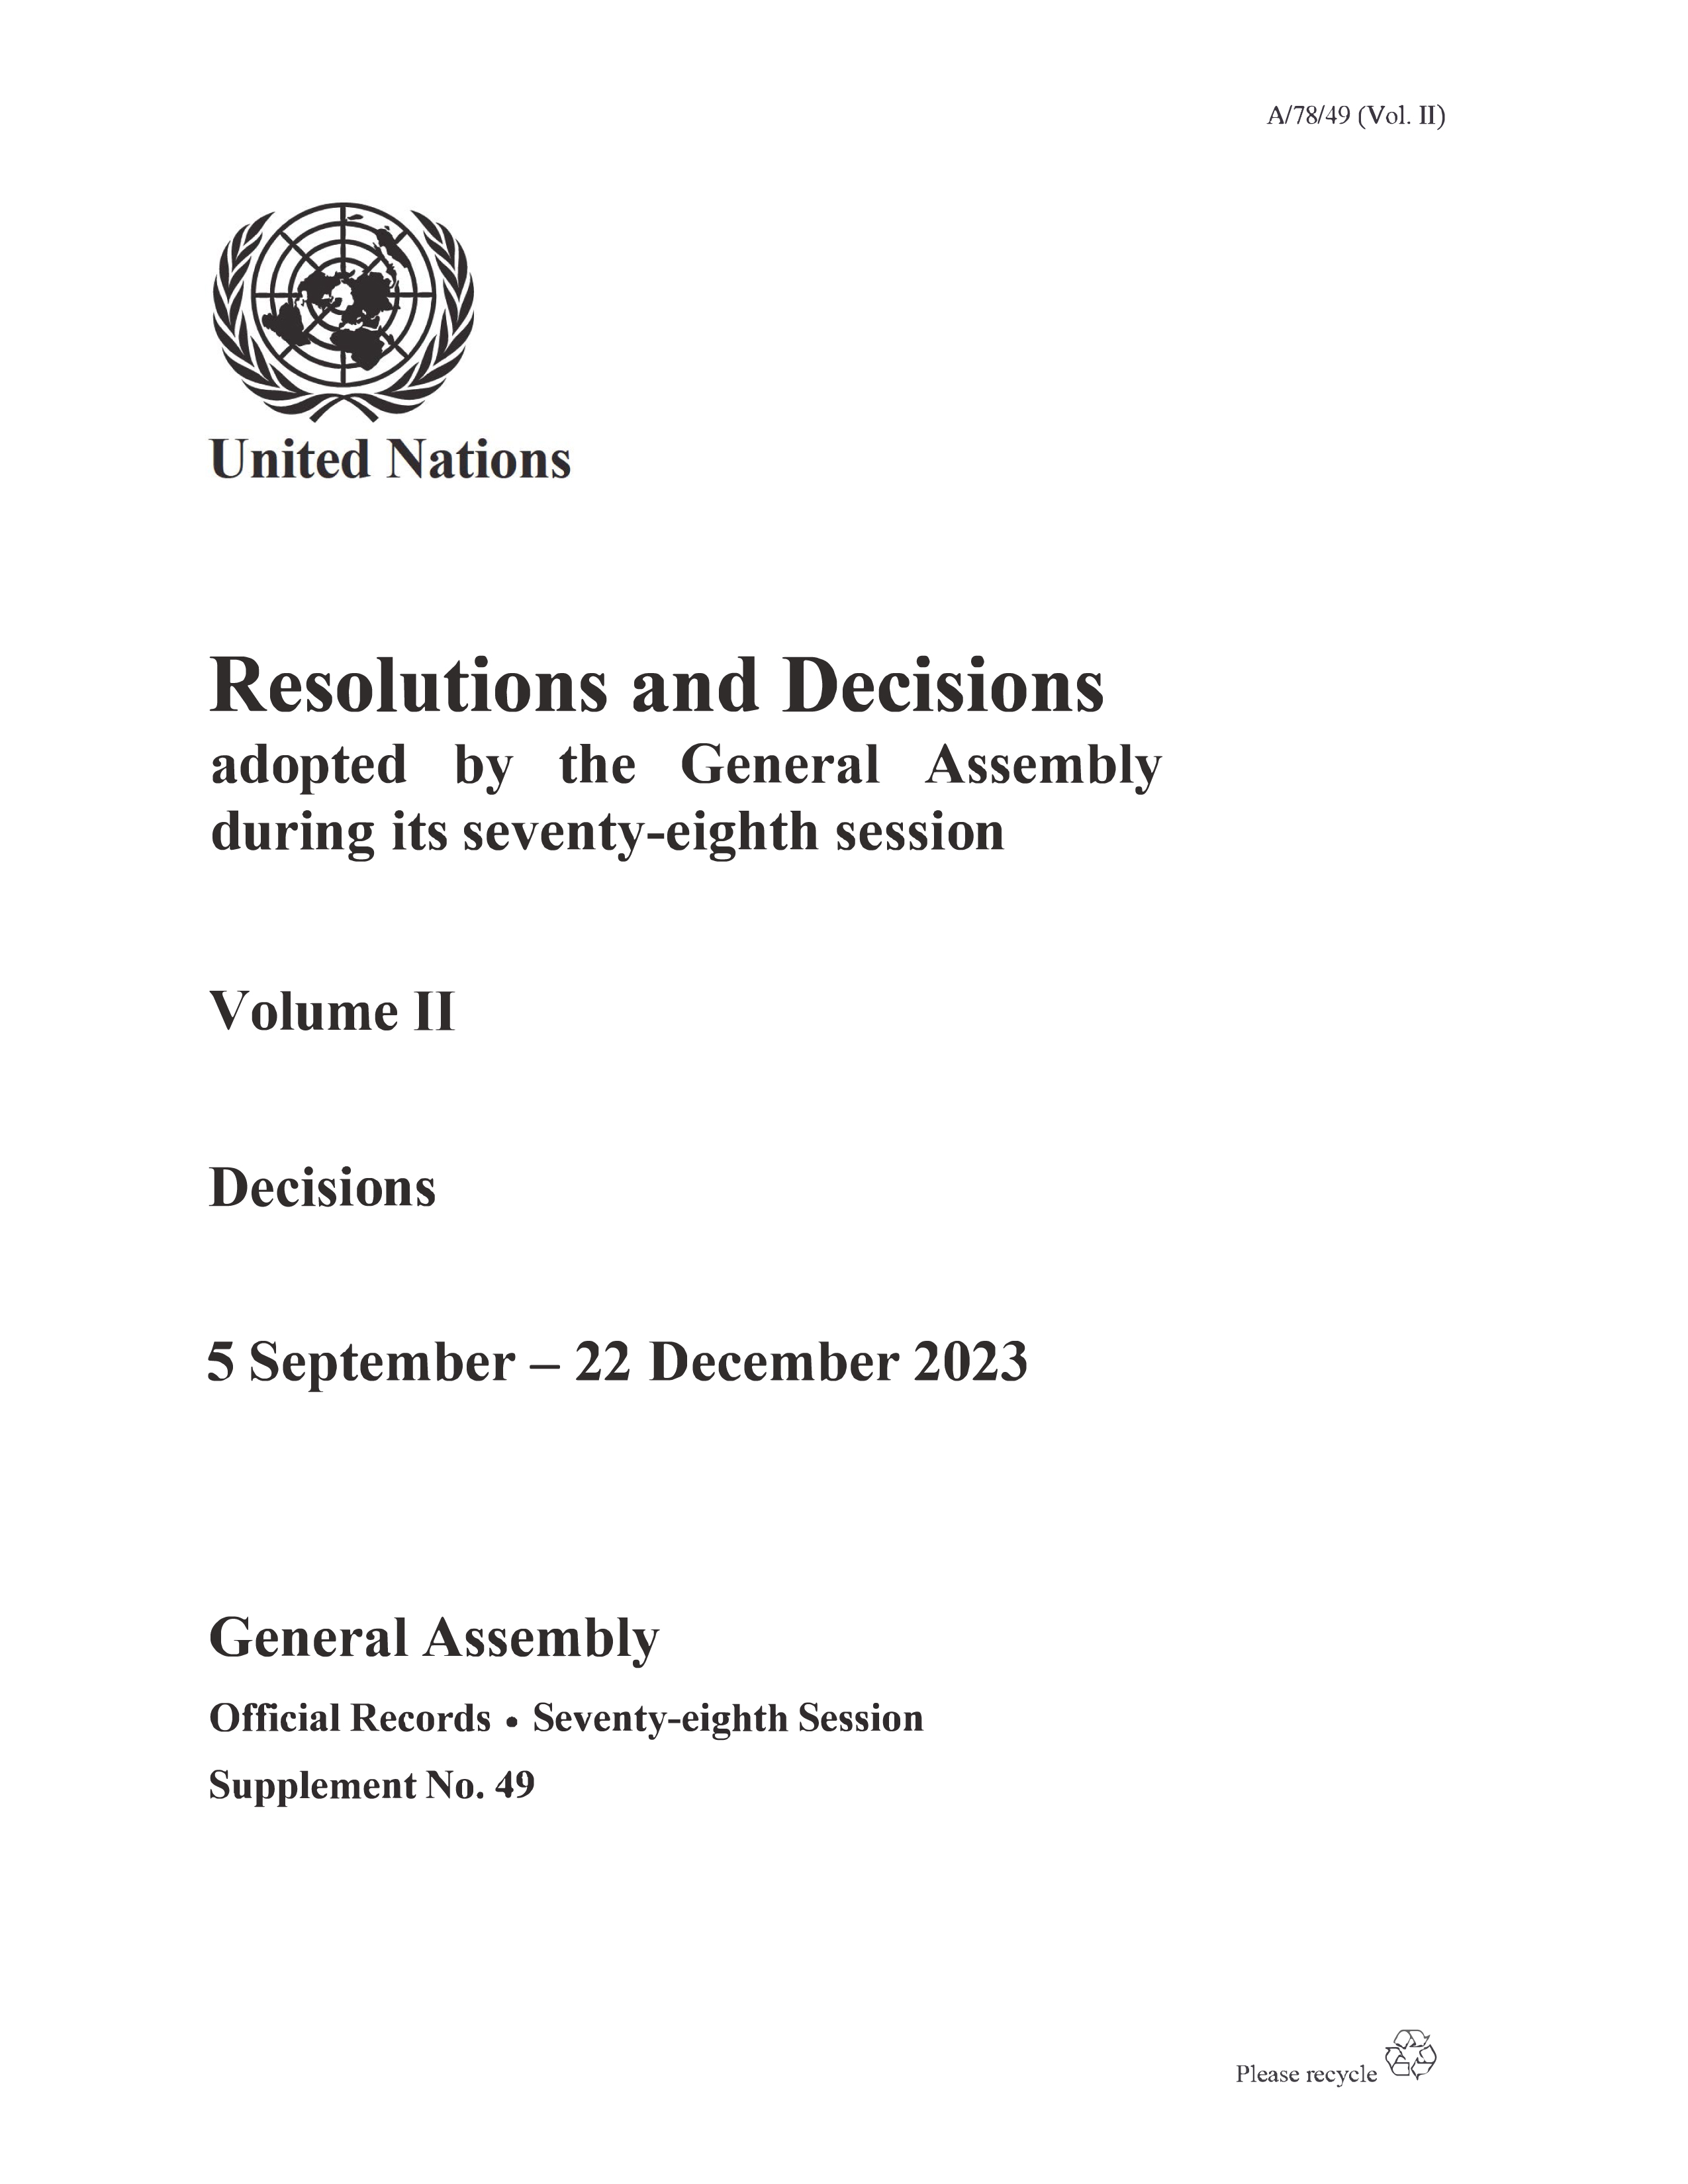 image of Resolutions and Decisions adopted by the General Assembly During its Seventy-eighth Session: Volume II